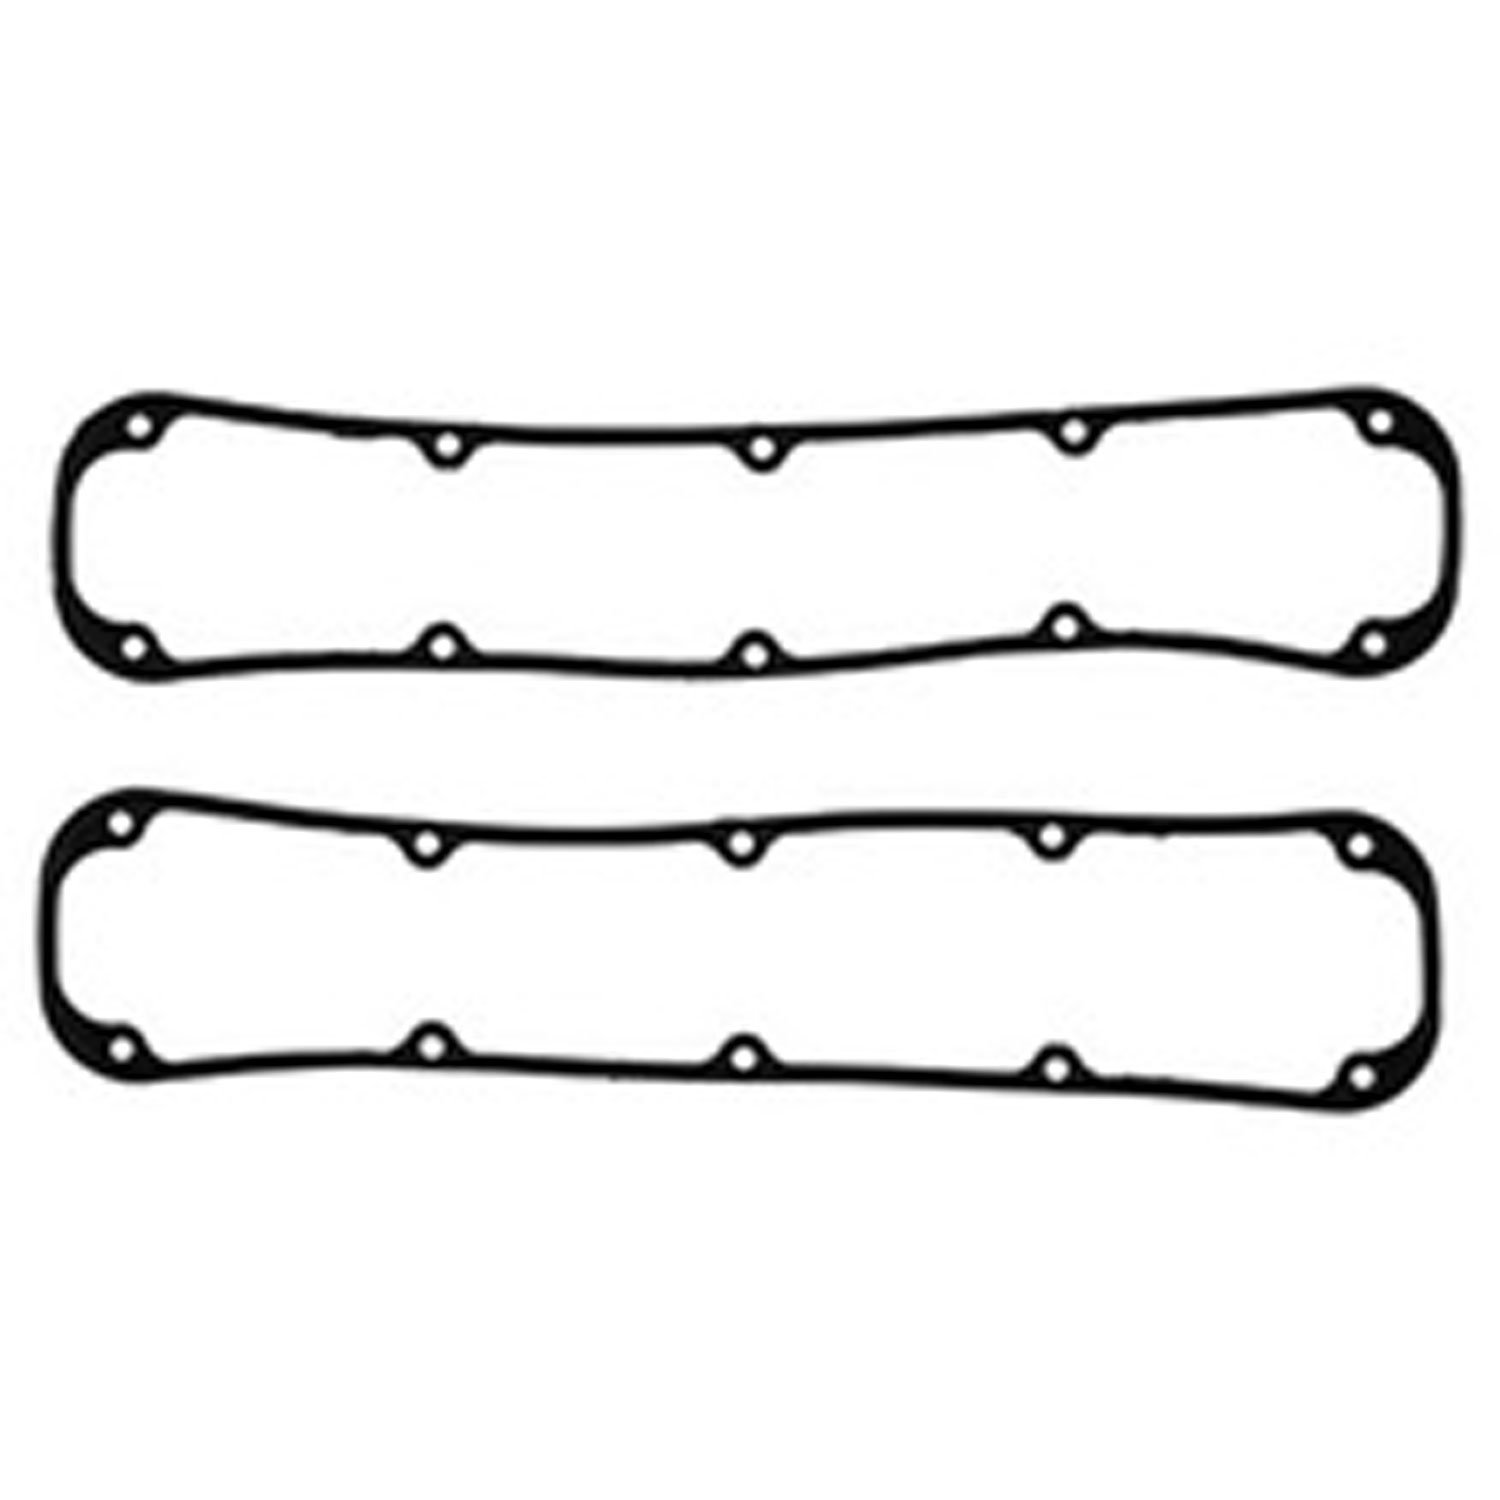 Valve Cover Gaskets Pair 1993-1998 Grand Cherokee 5.2L